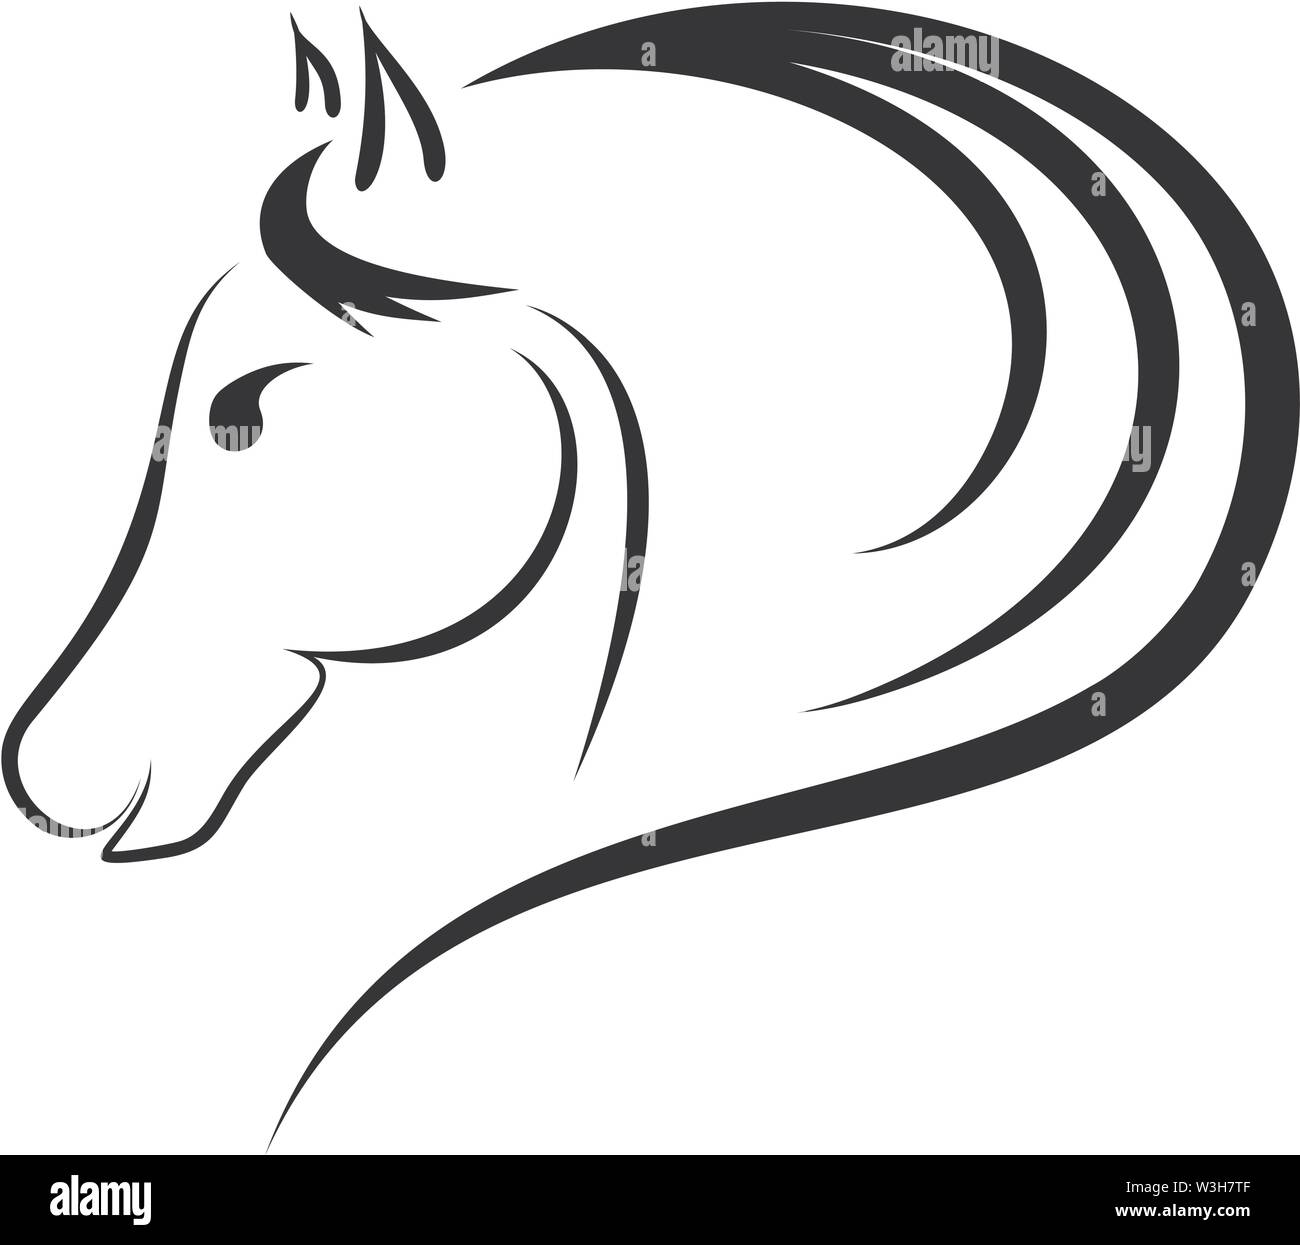 Linear drawing horse genre minimalism Stock Vector